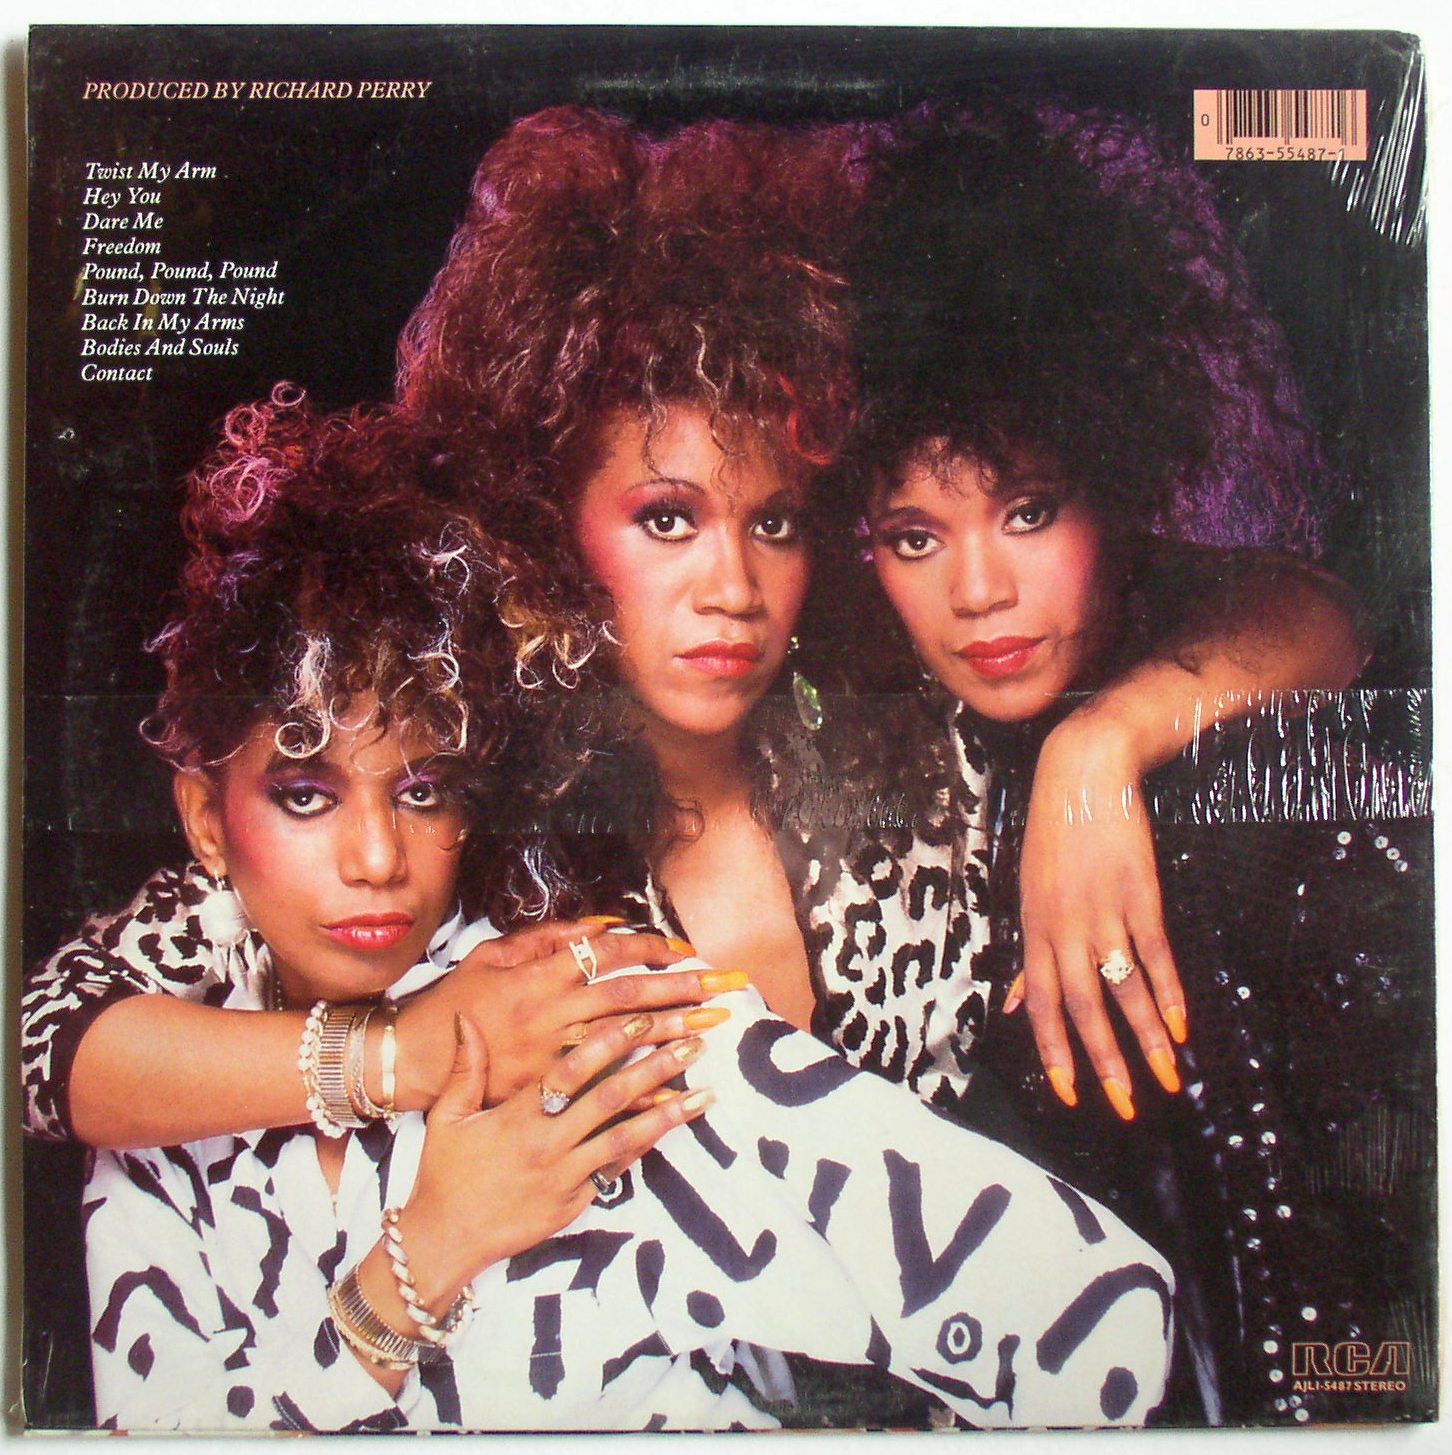 The Pointer sisters в молодости. Сёстры LP. The Pointer sisters - i'm so excited год выпуска. Сестрички Live. G sisters